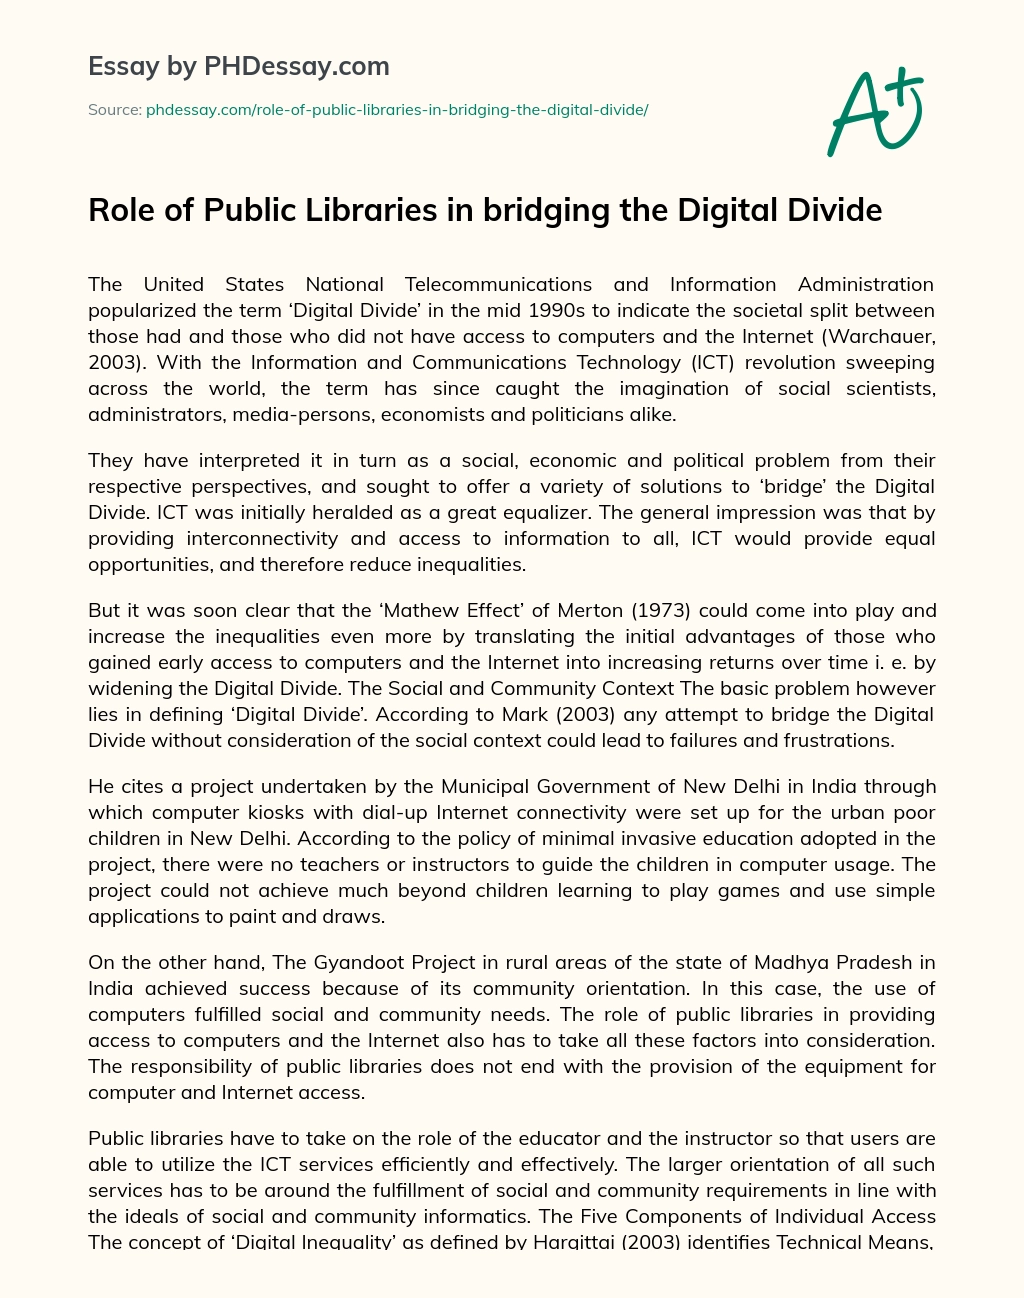 Role of Public Libraries in bridging the Digital Divide essay